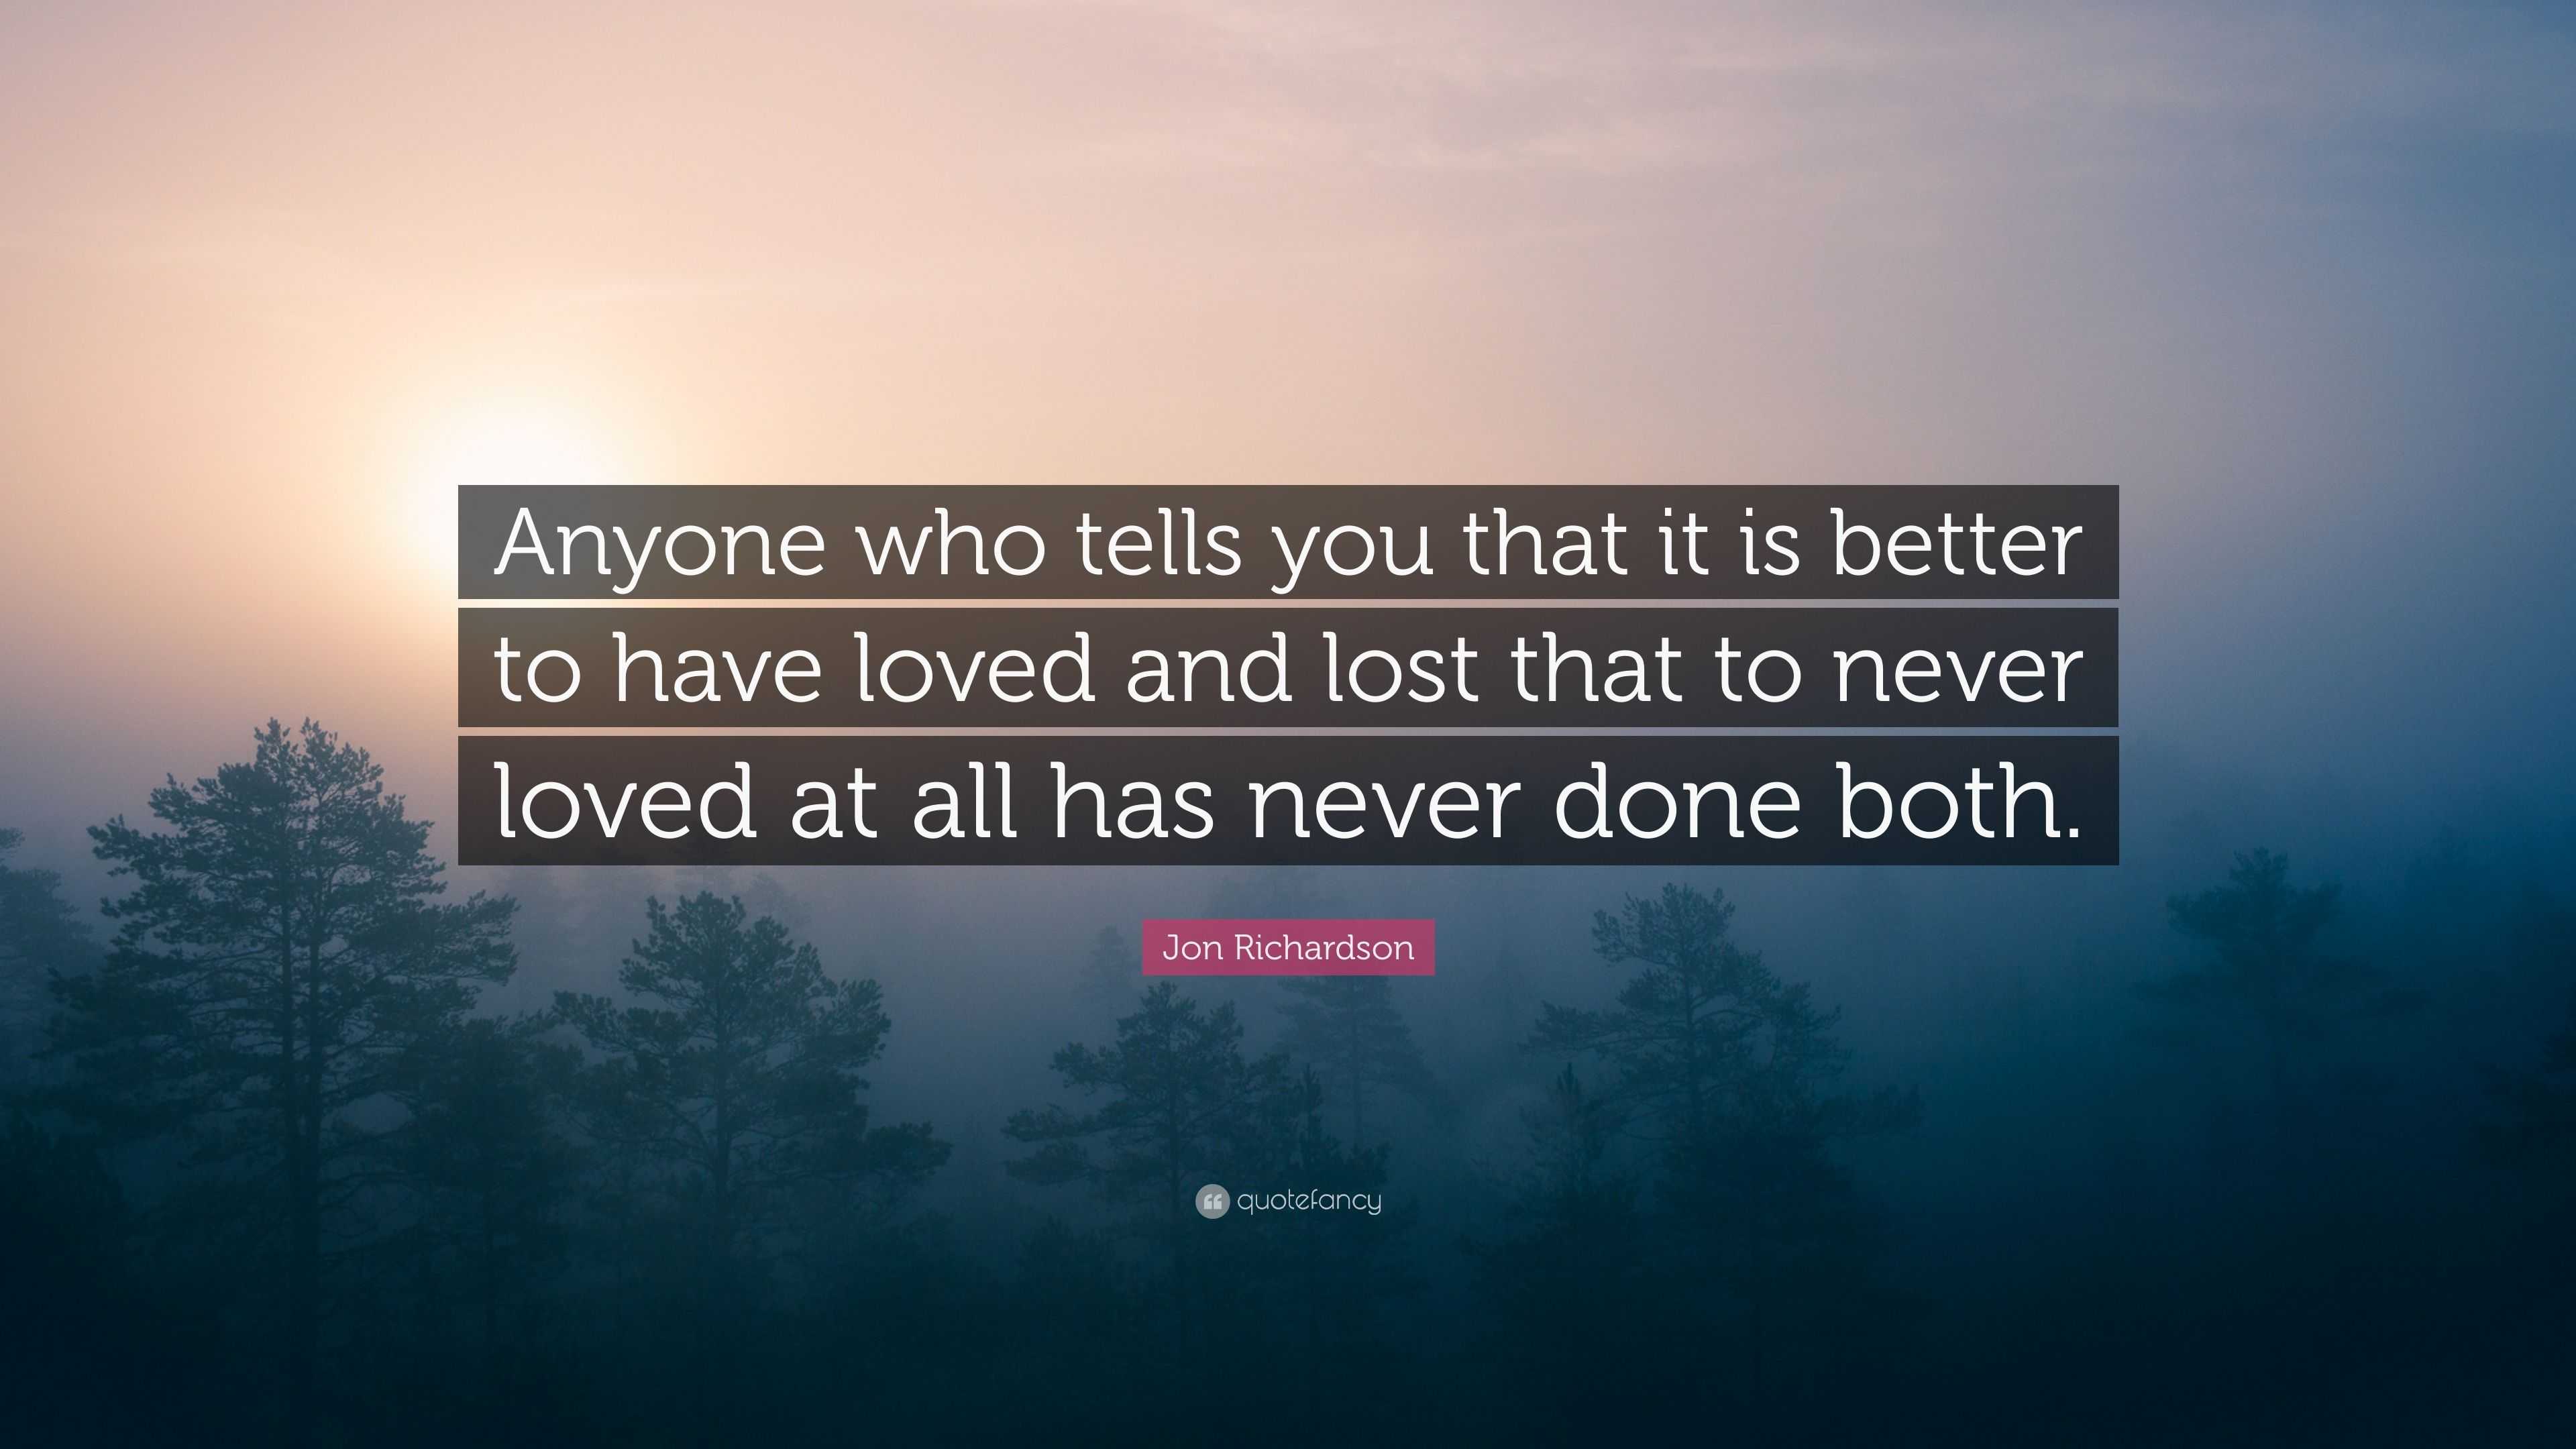 Jon Richardson Quote: “Anyone who tells you that it is better to have ...